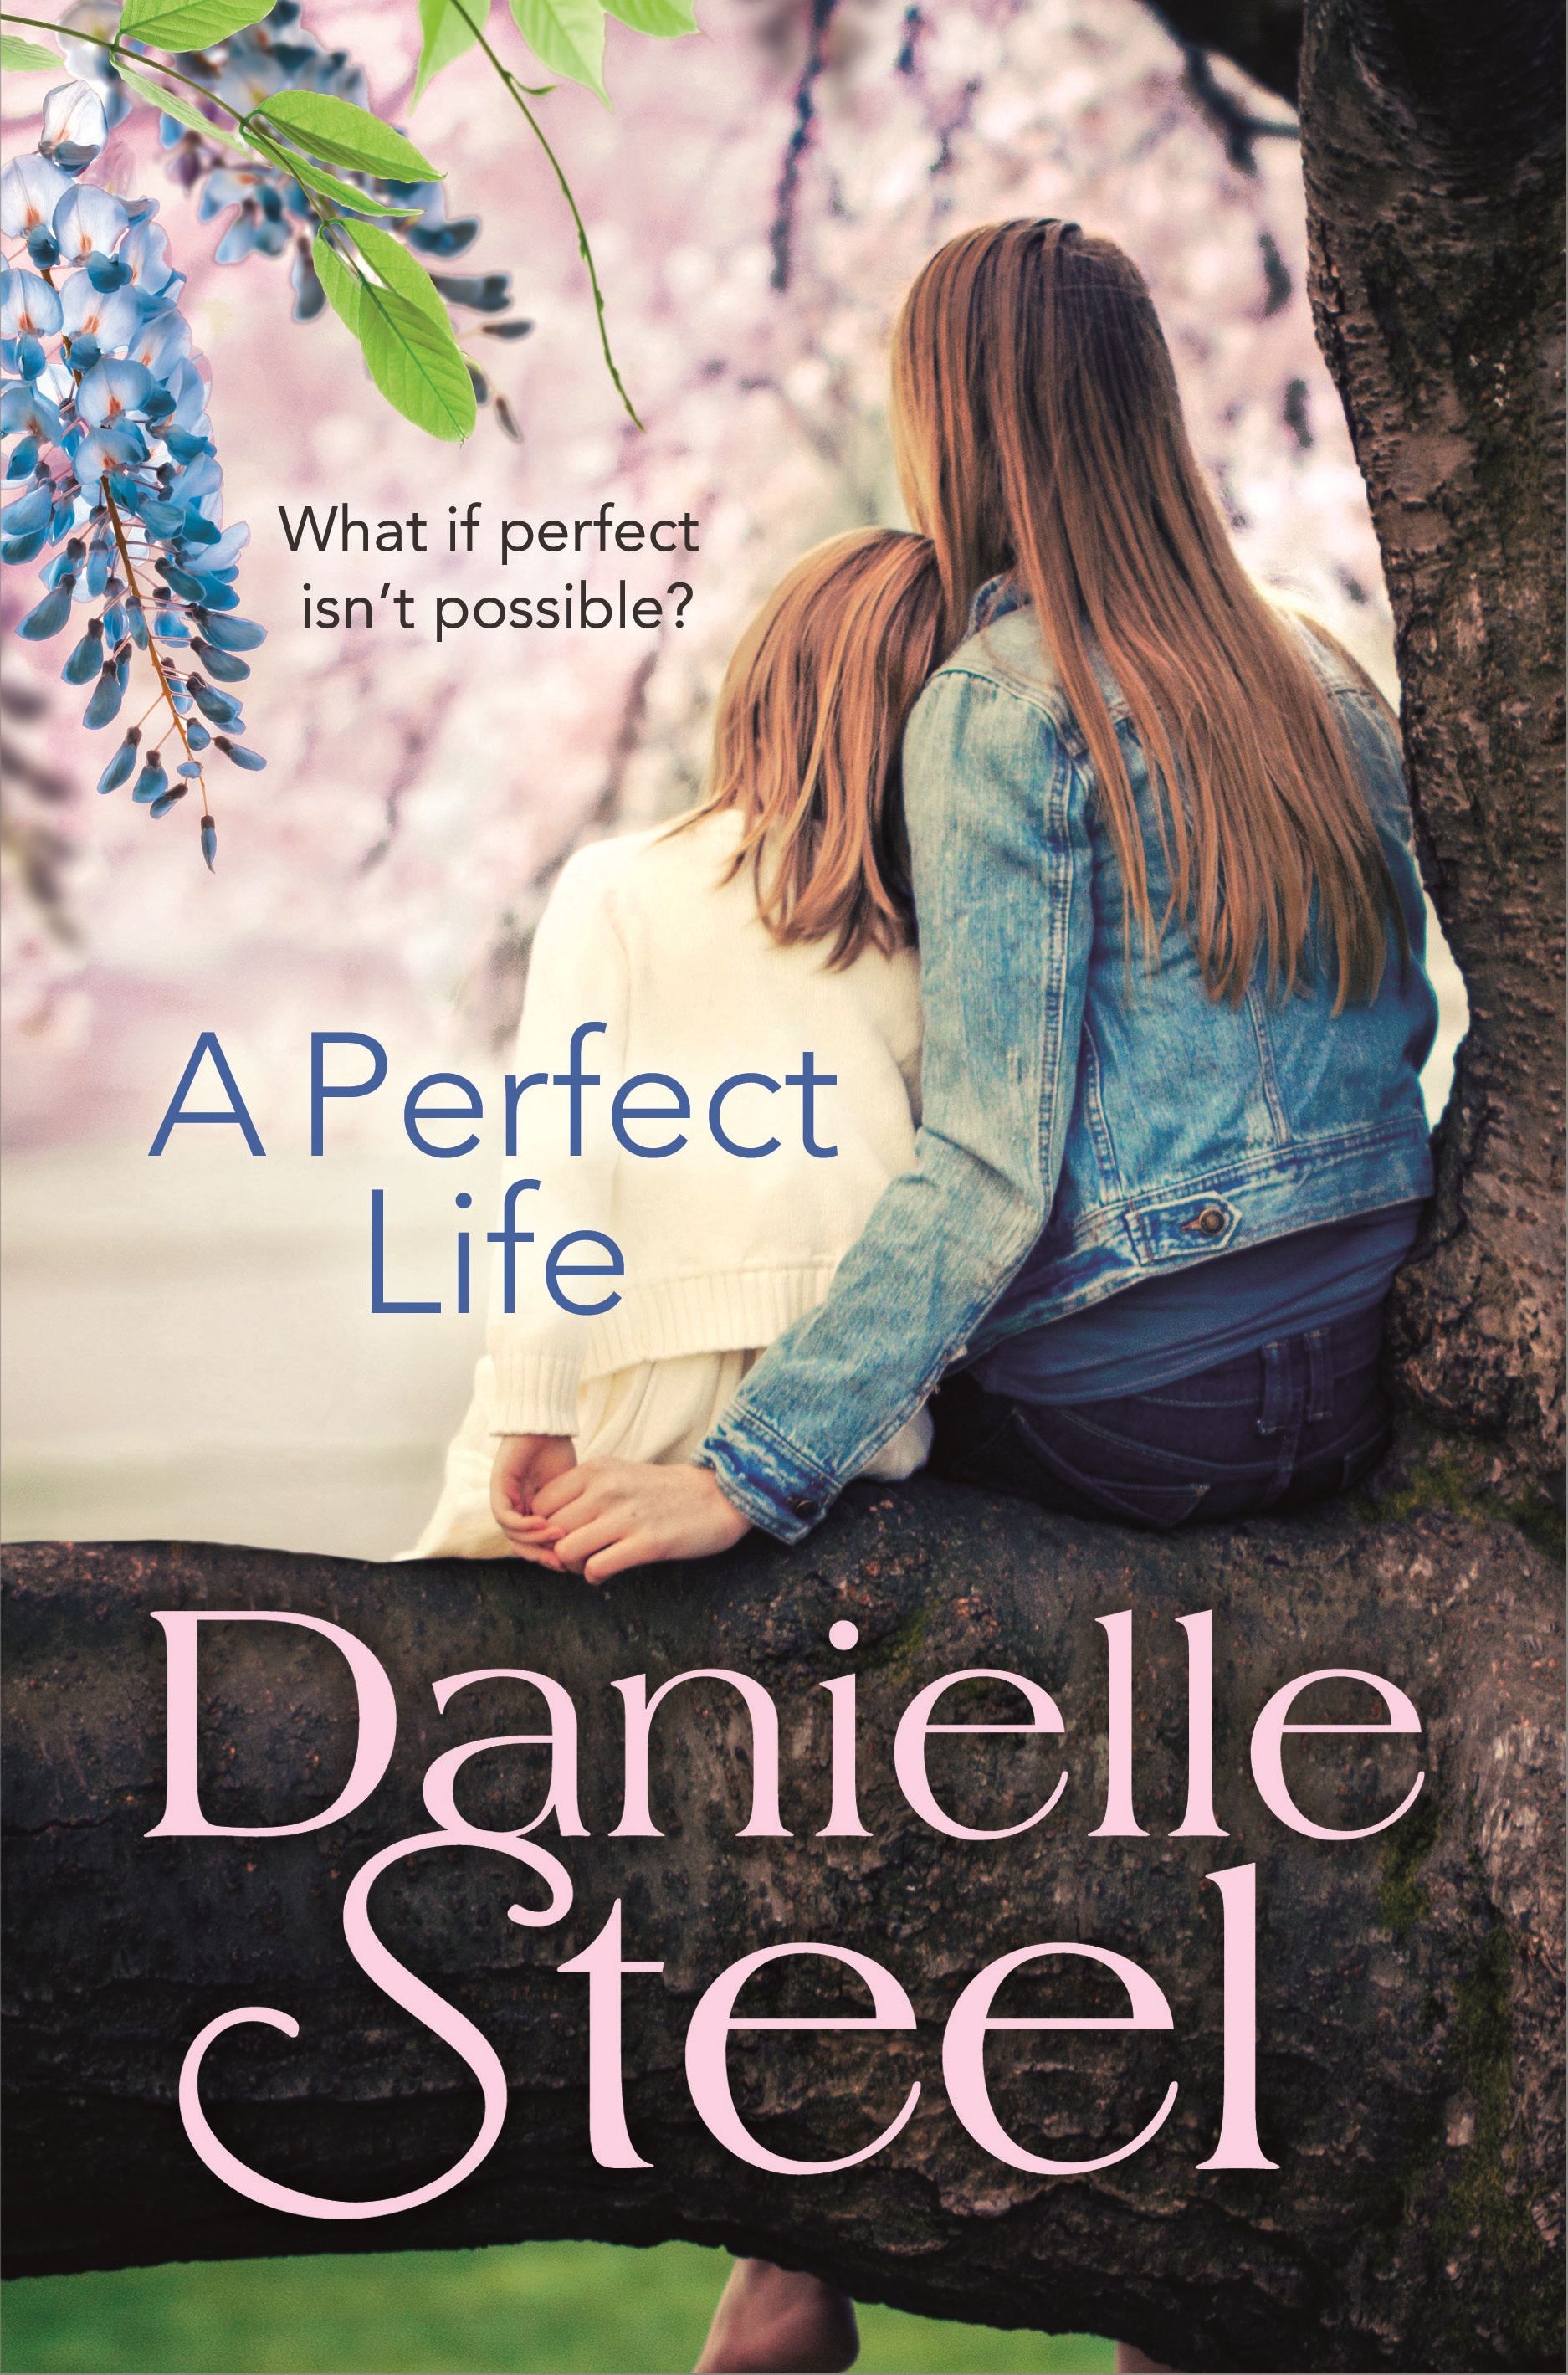 Perfect Life. Steel d. "perfect Life". Danielle Steel "a good woman".